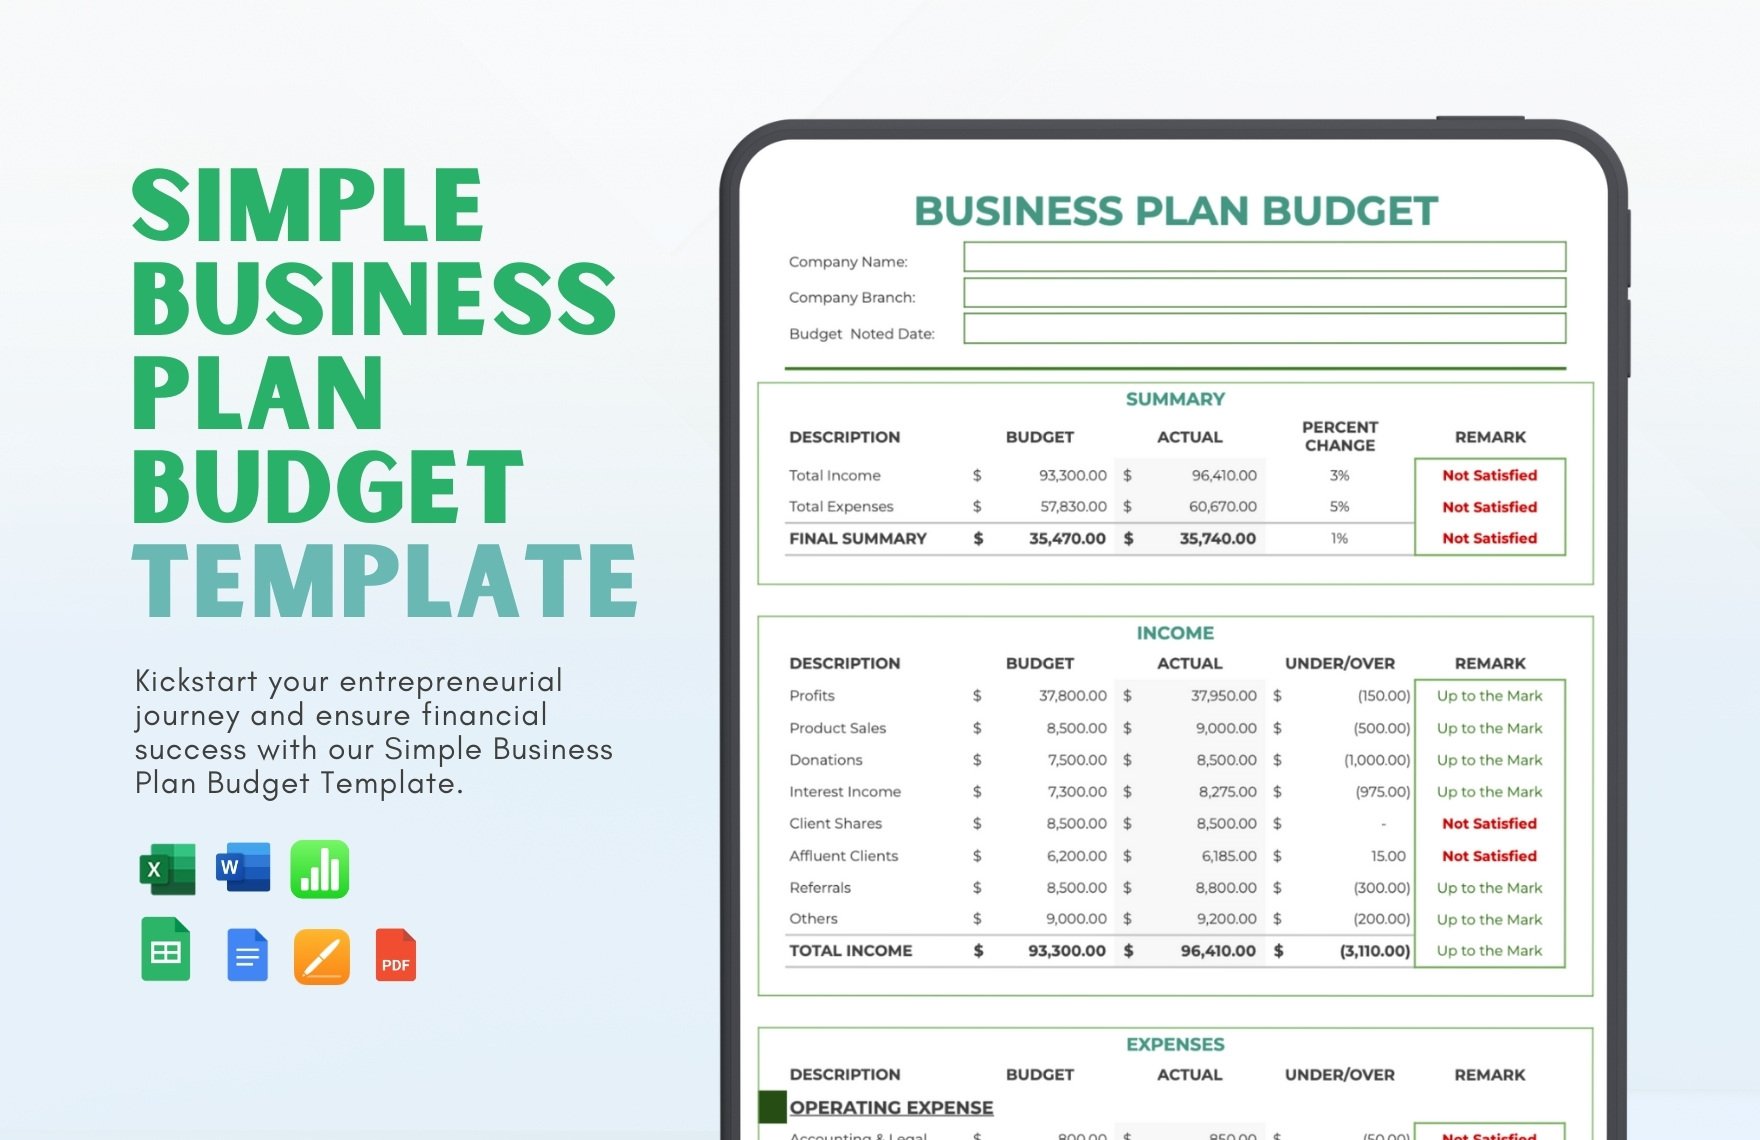 Printable Budget Templates - Download PDF A4, A5, Letter size